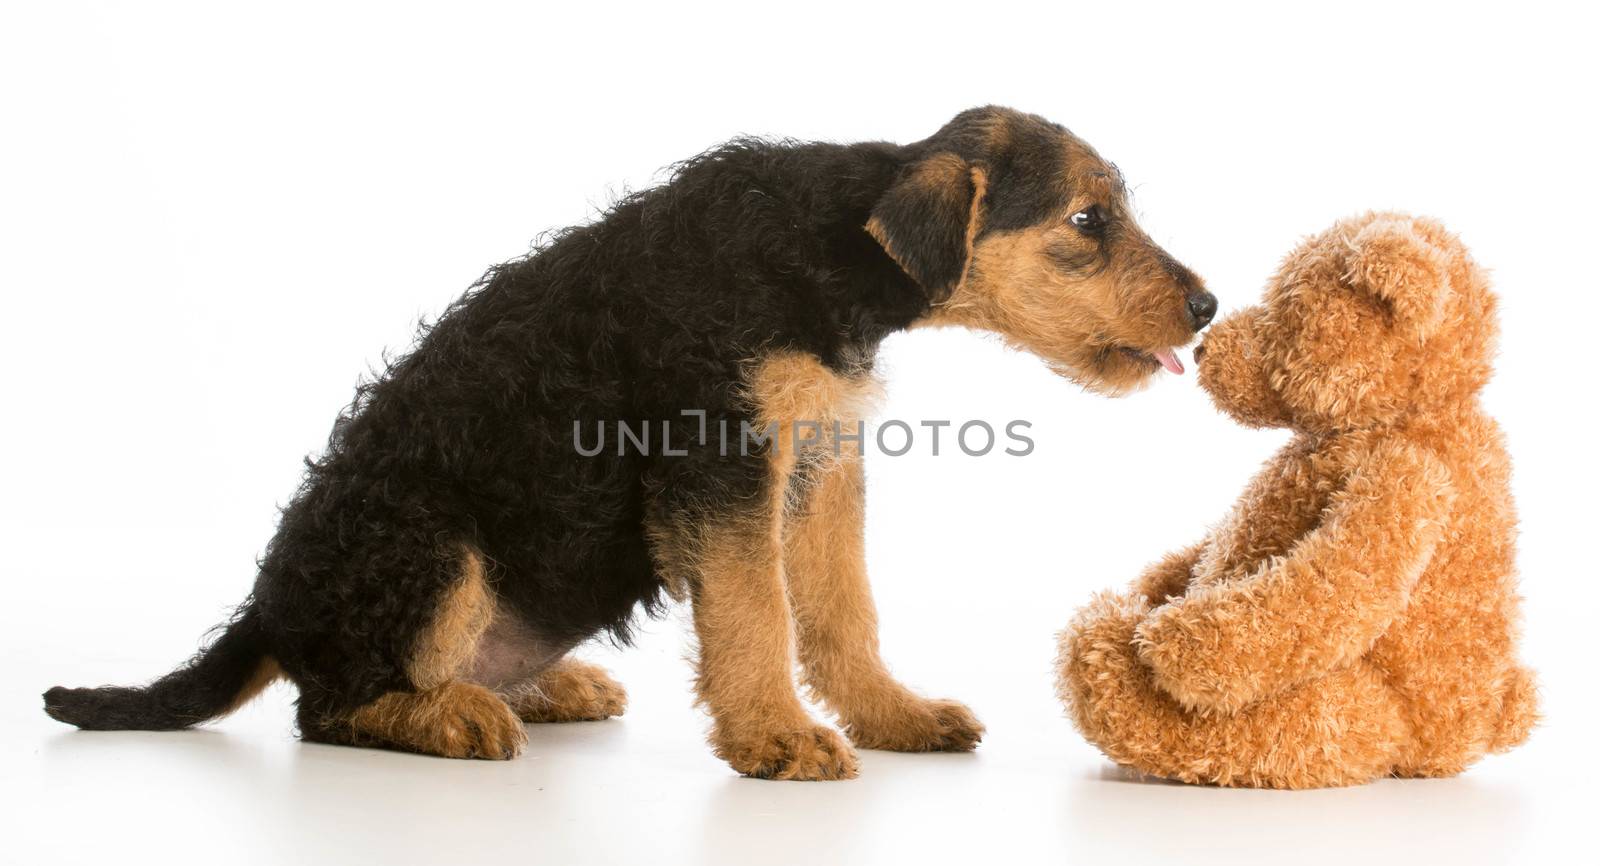 cute puppy and teddy bear by willeecole123